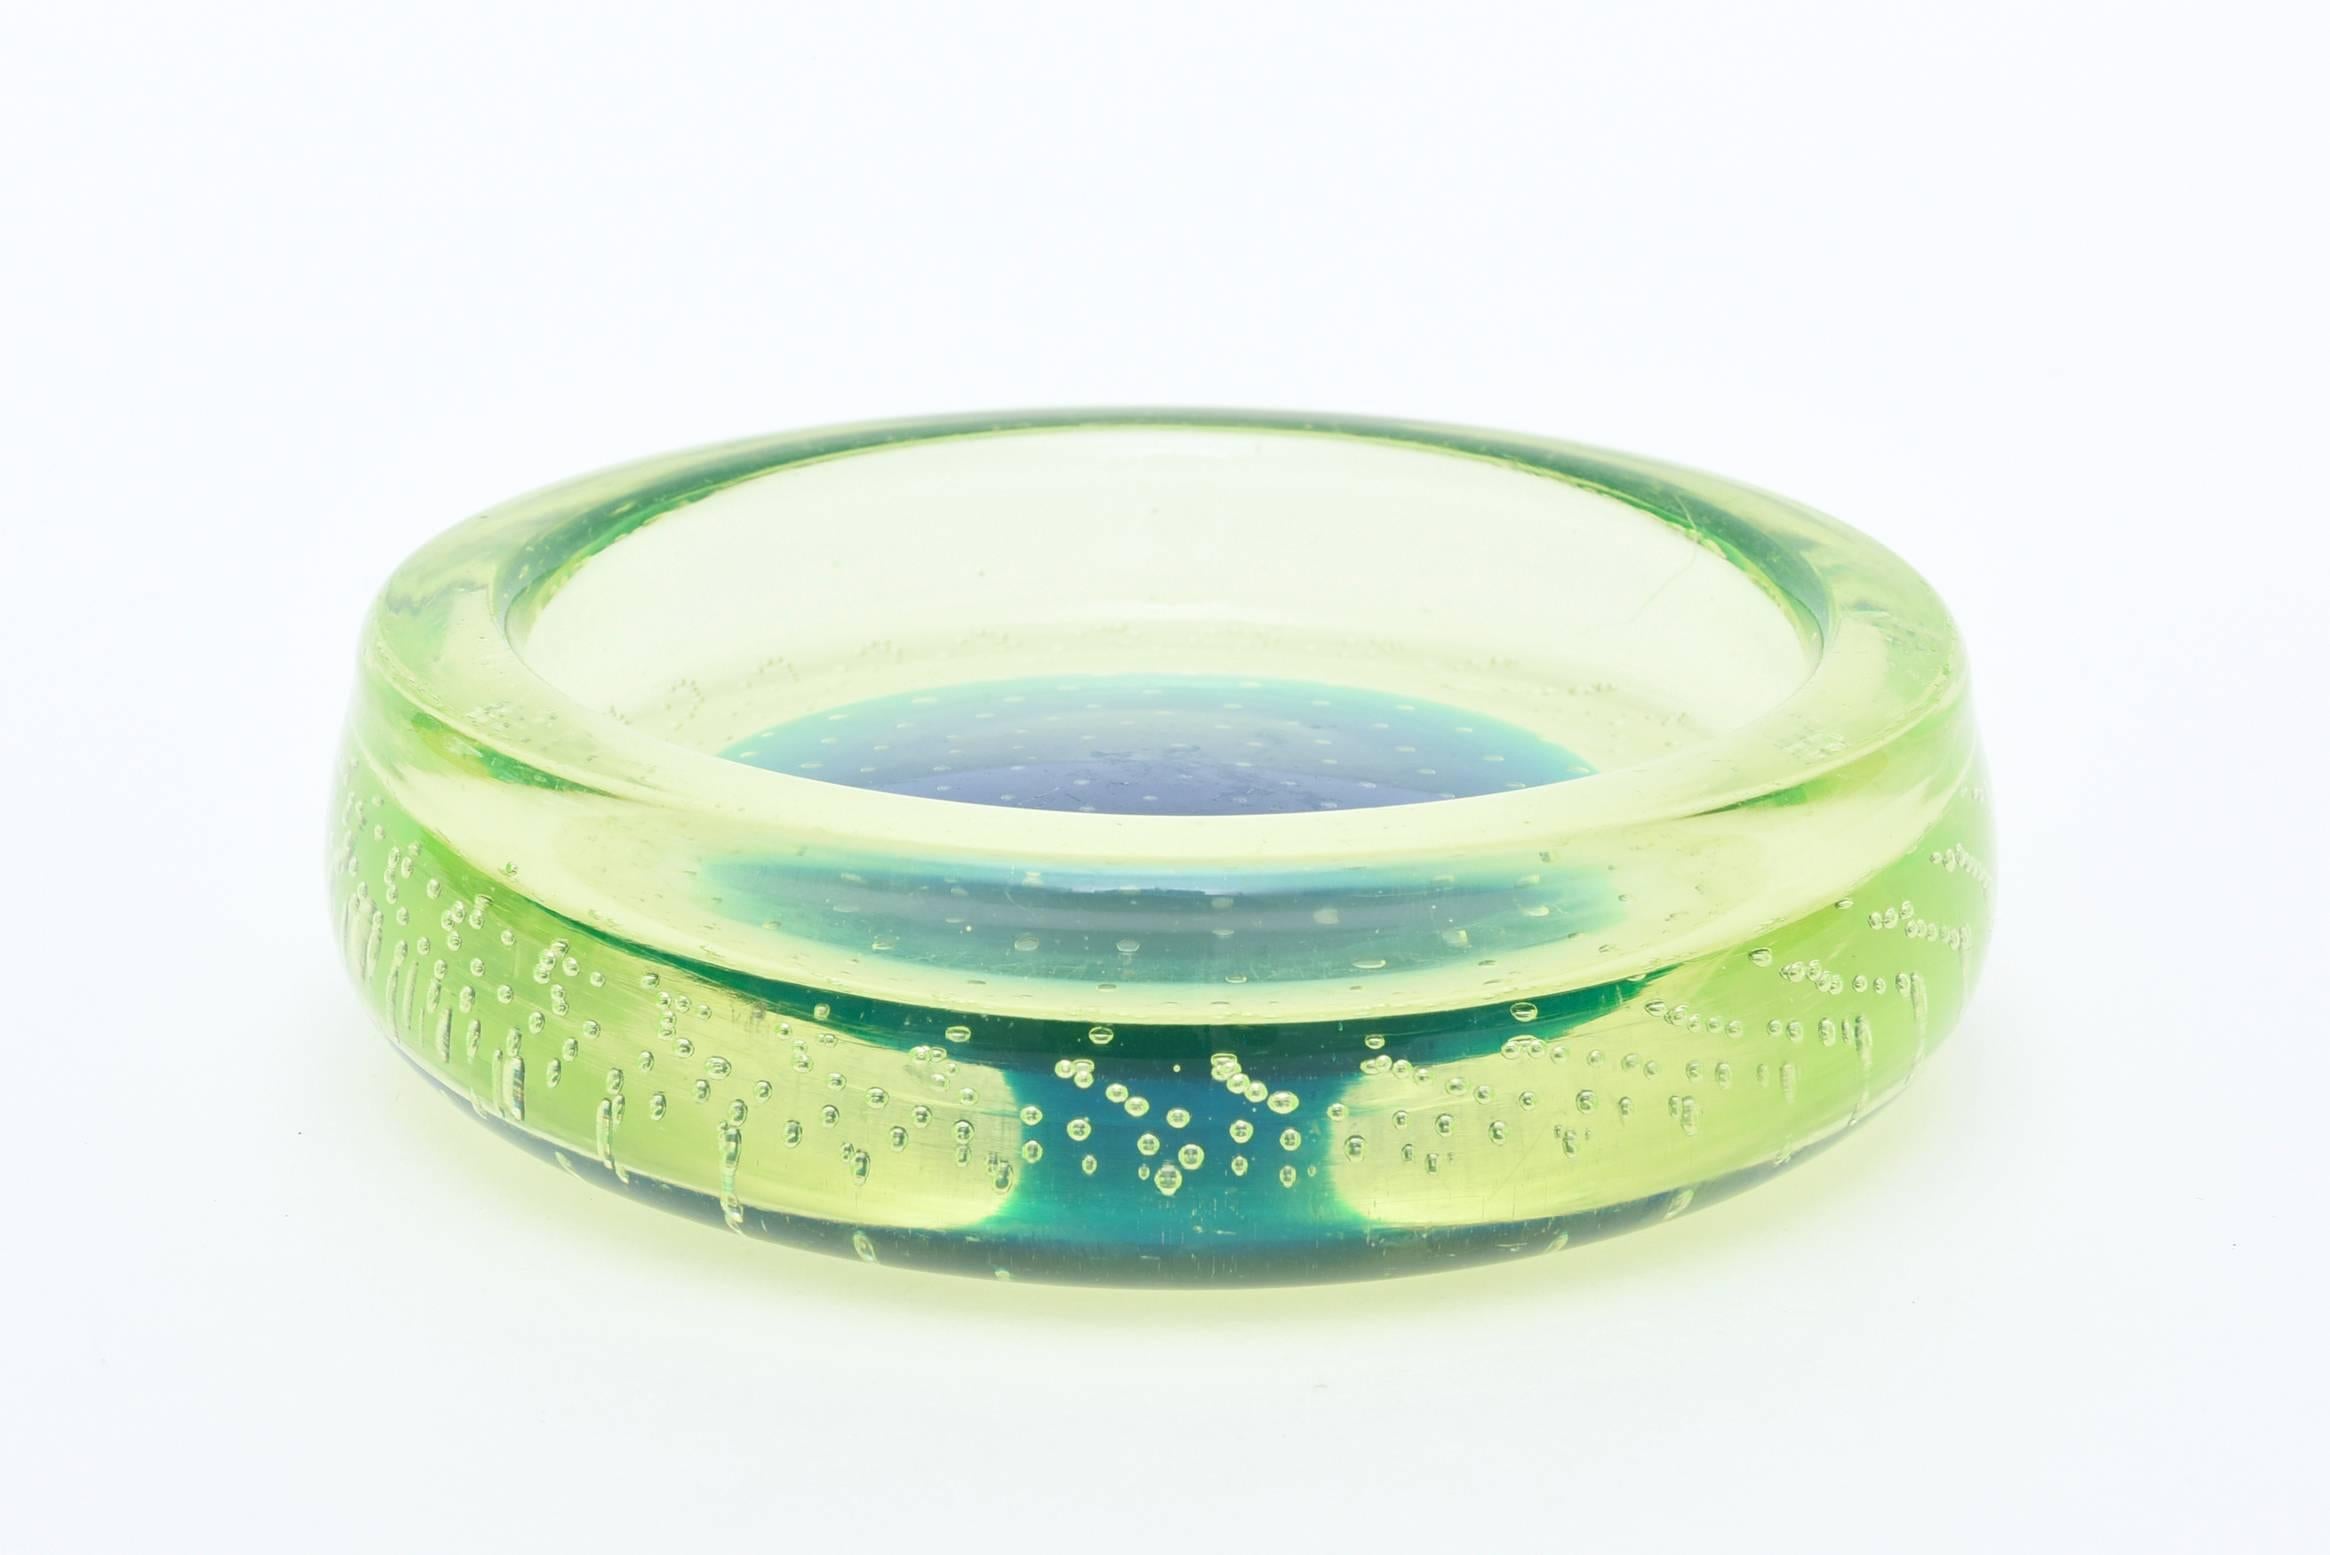 The luscious colors of chartreuse green meet up with the center of sapphire blue amongst plentiful bubbles called bullecante in this arresting Italian Murano glass bowl.
The top is polished with polished underlip and it is sculptural.